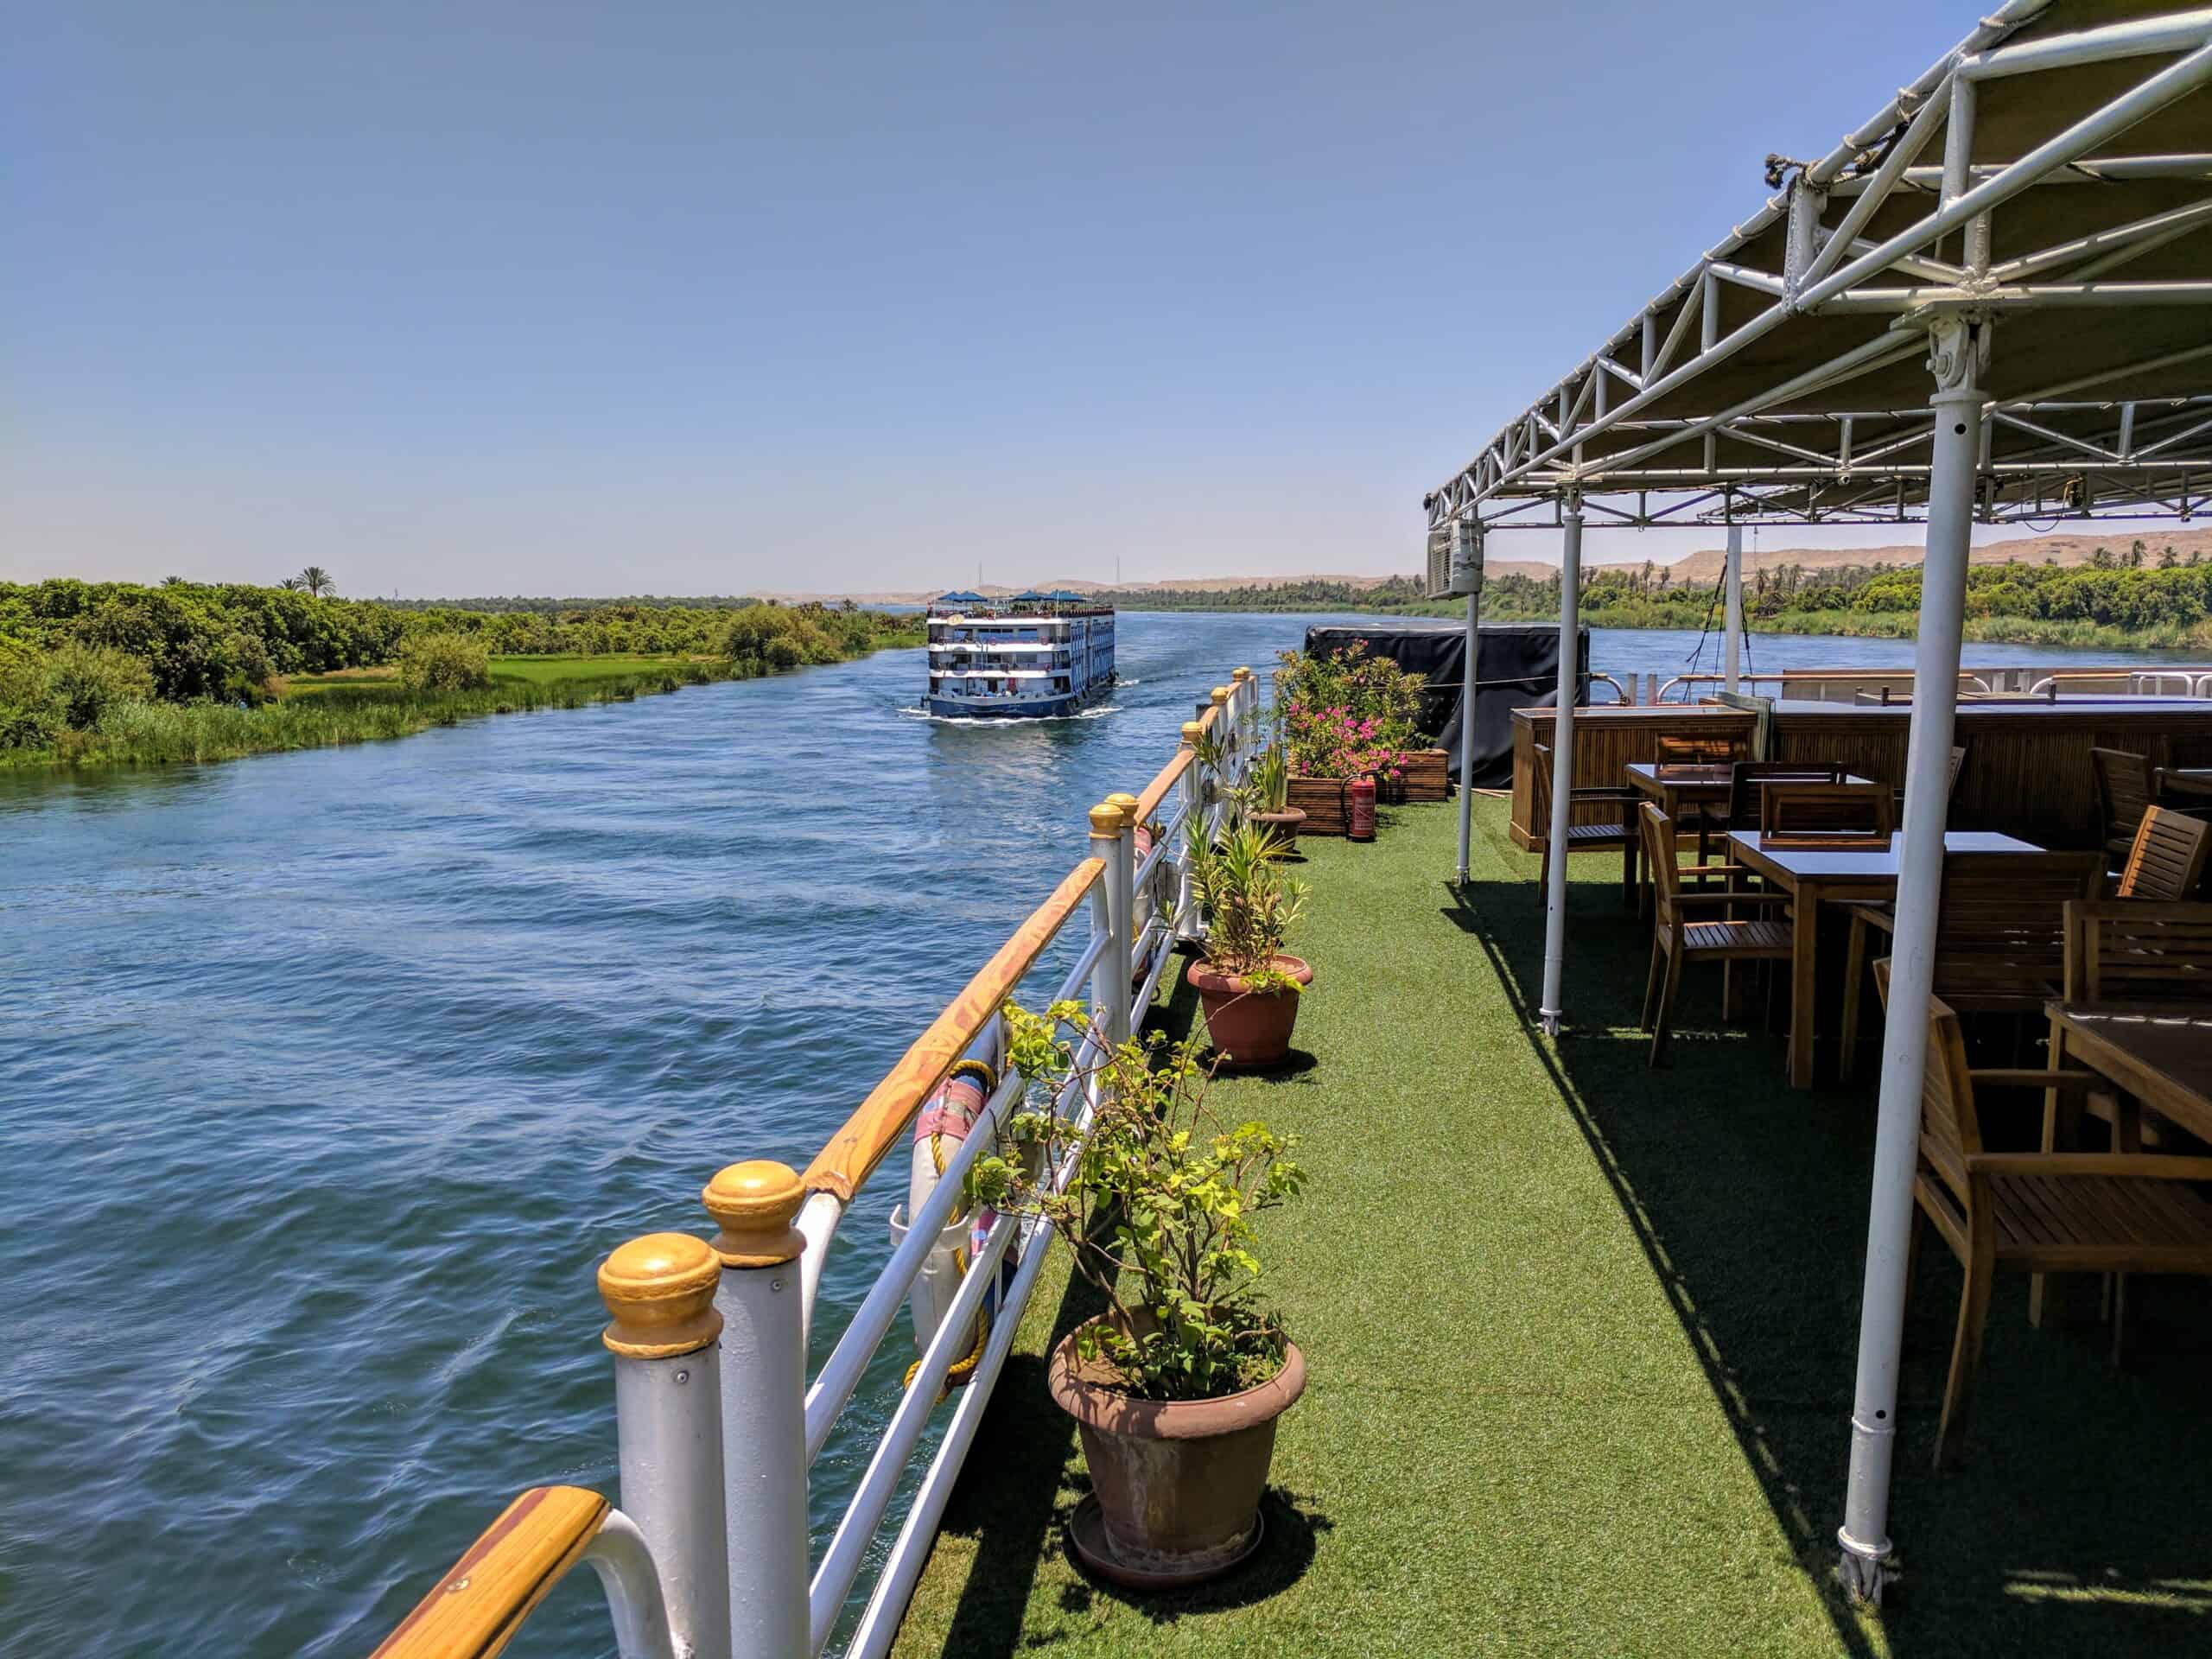 Cruising on the enigmatic Nile River.